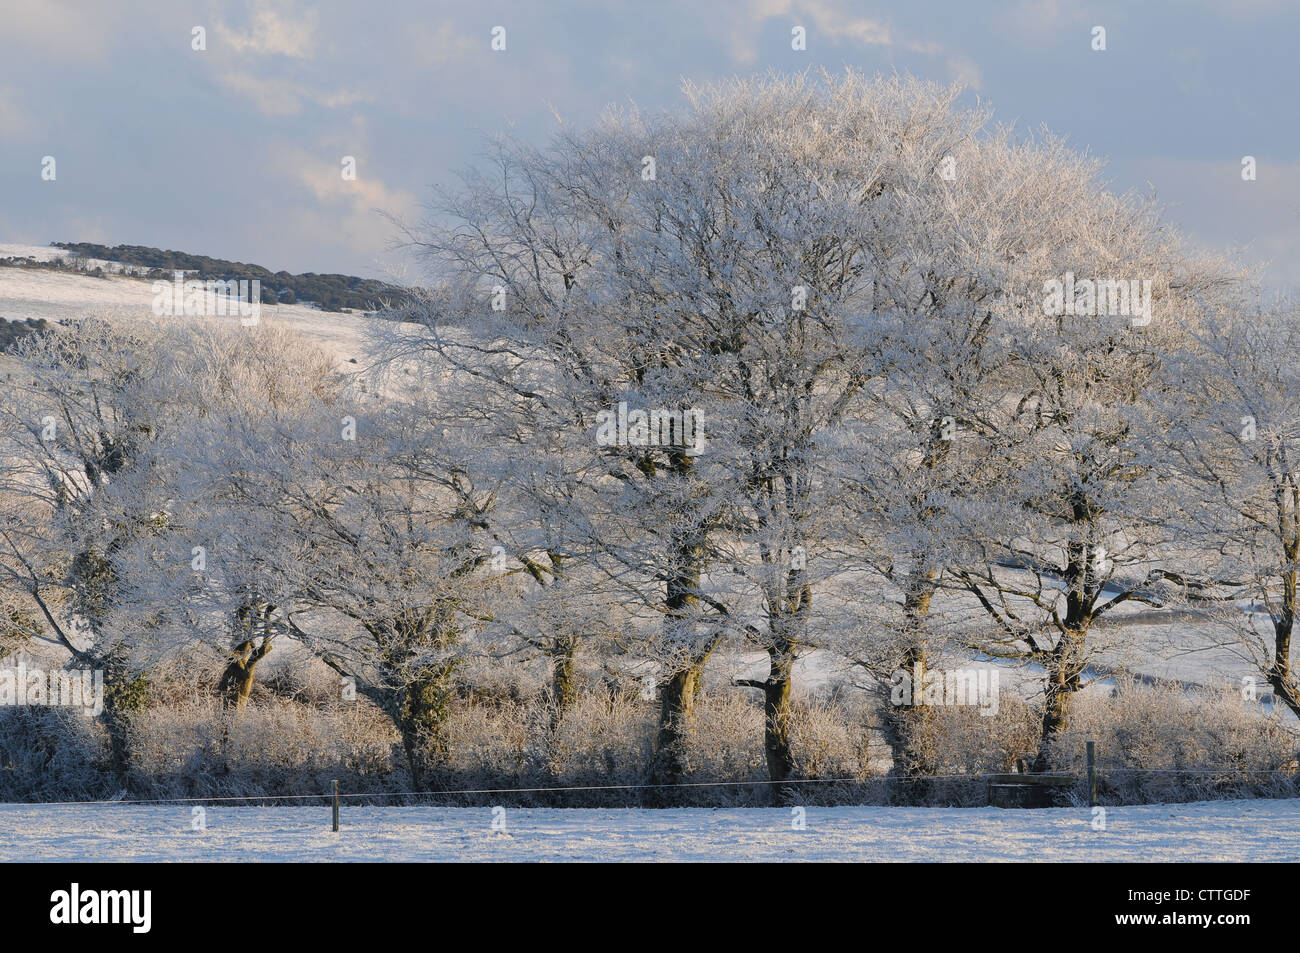 A row of Beech trees covered in snow, Slane, County Meath, Ireland Stock Photo